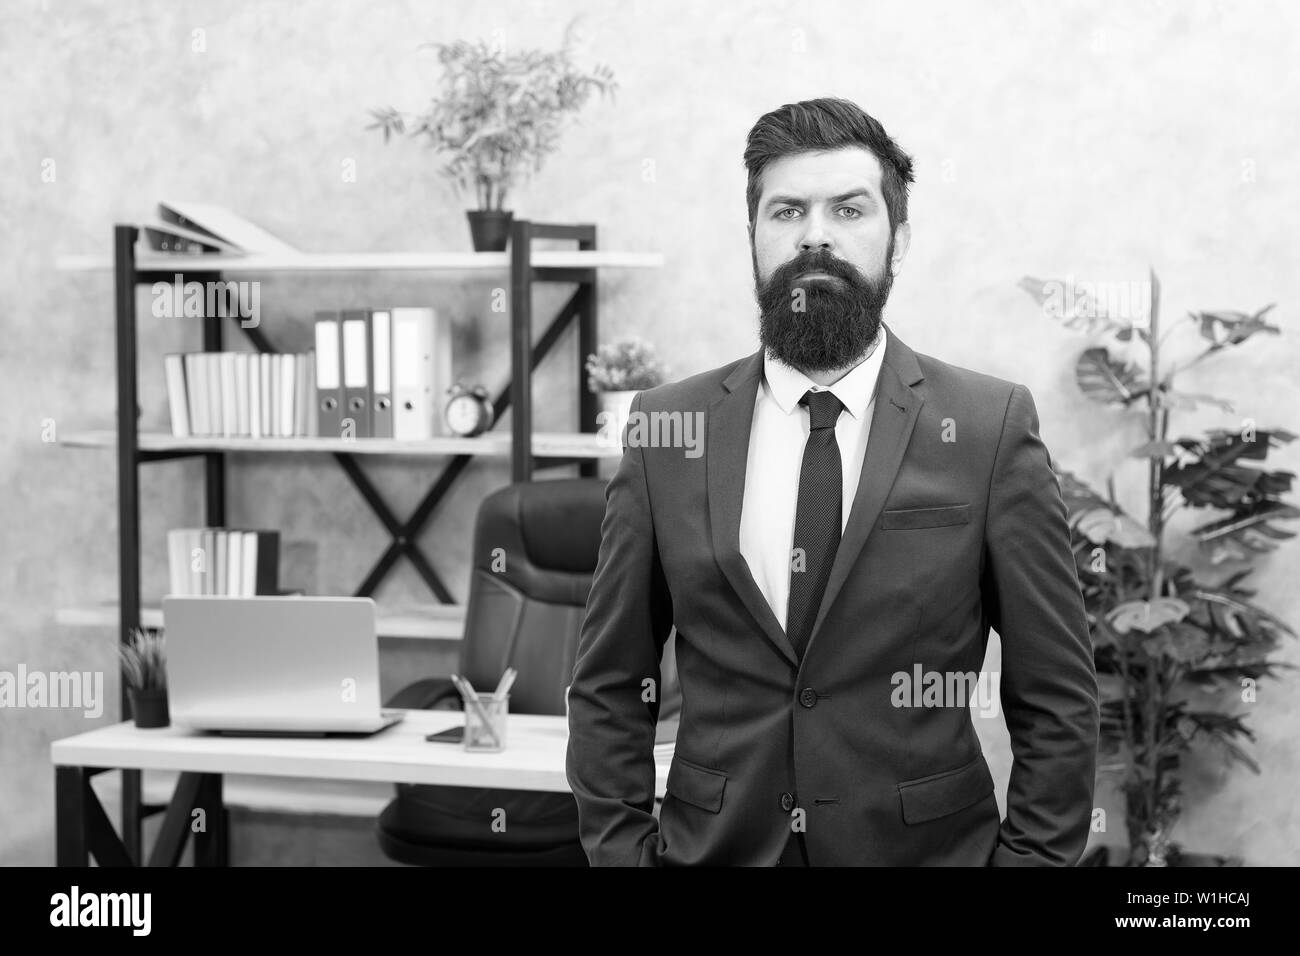 Office staff. HR director. HR management. HR job description. Head of human resources department. Man bearded serious office background. Provide consultation to management on strategic staffing plans. Stock Photo